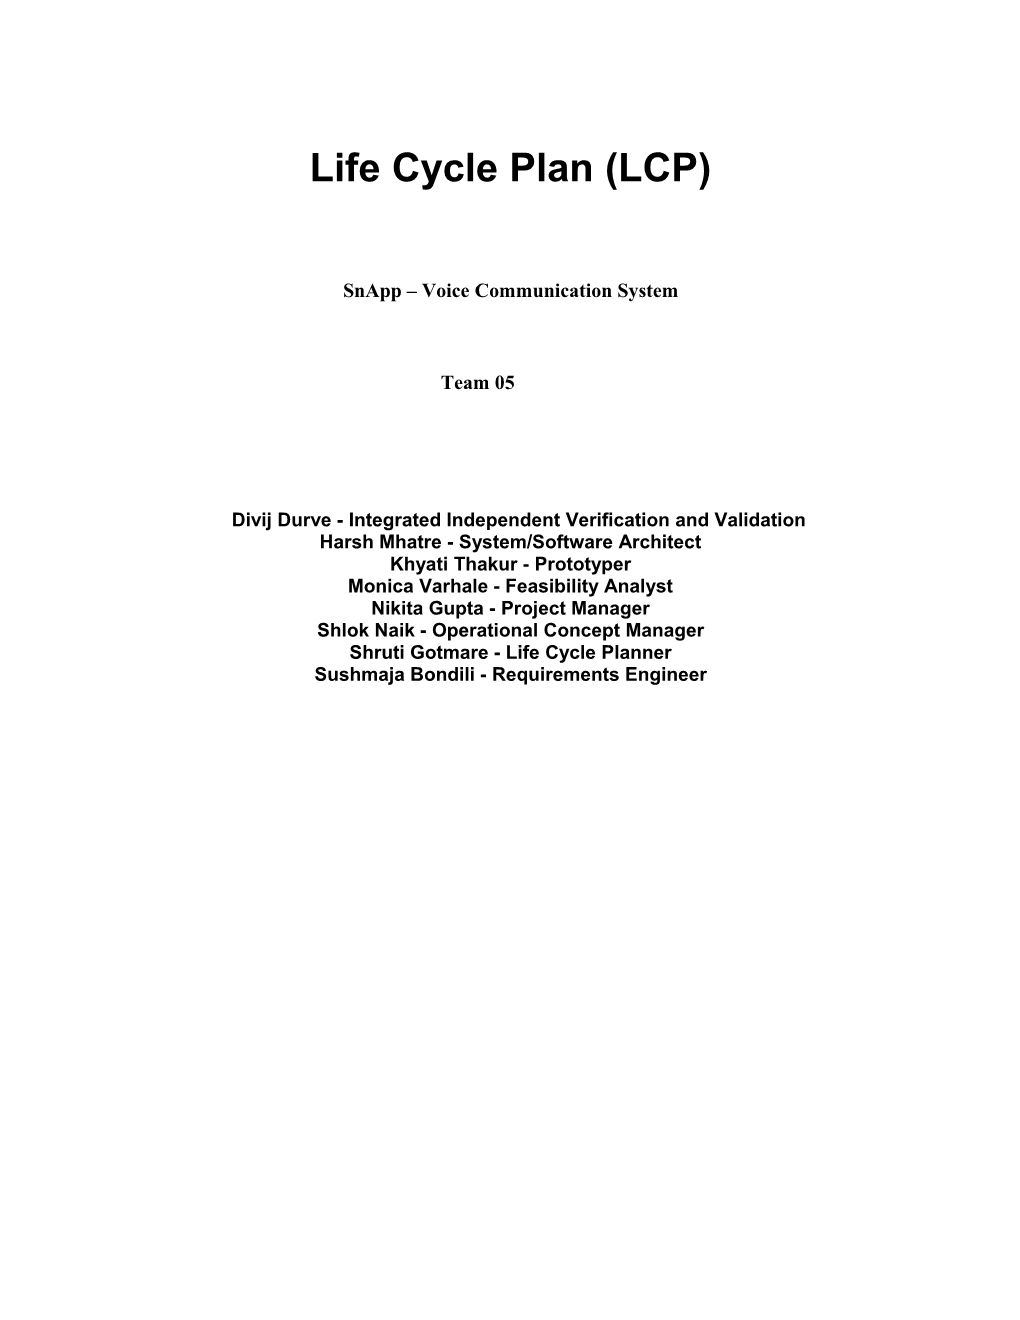 Life Cycle Plan (LCP) s6